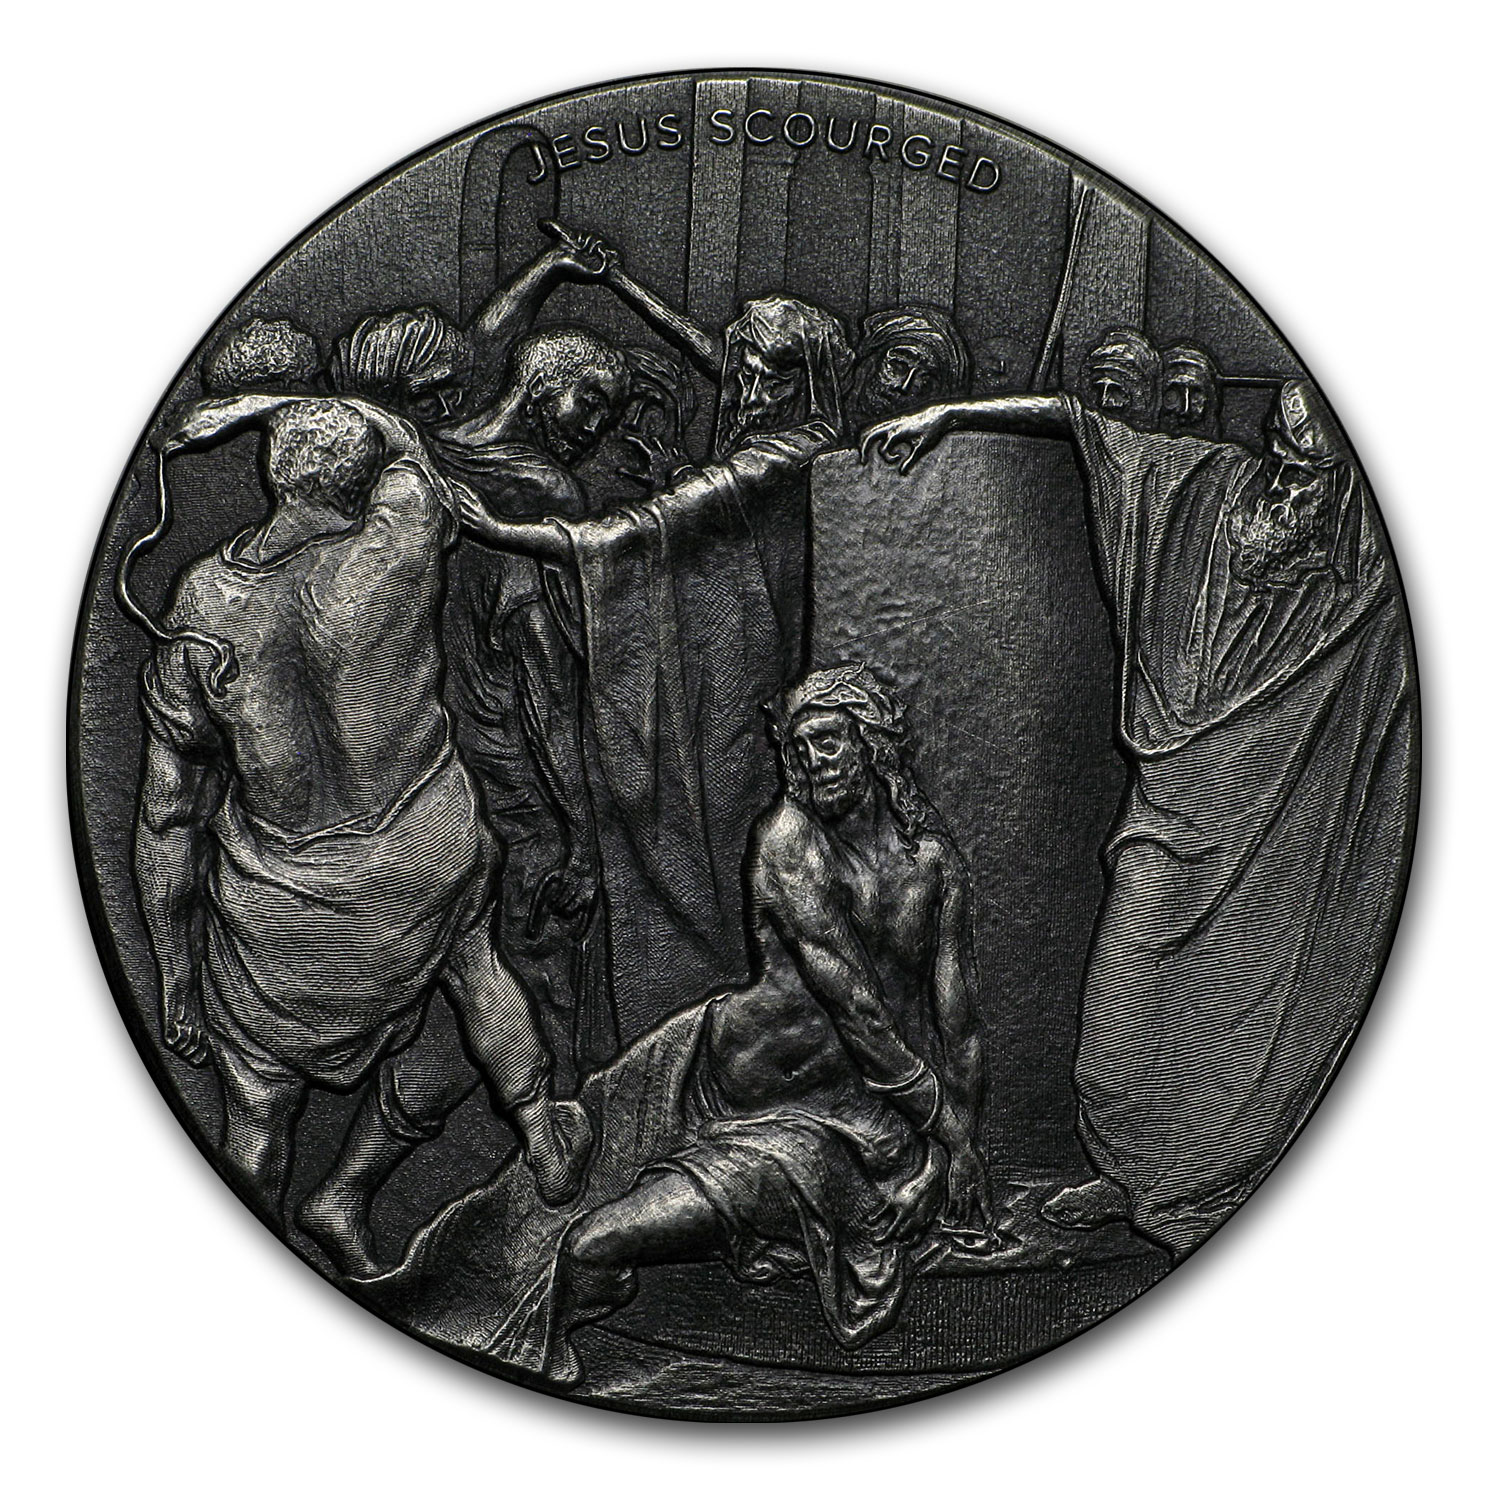 Buy 2018 2 oz Silver Coin - Biblical Series (Jesus Scourged)